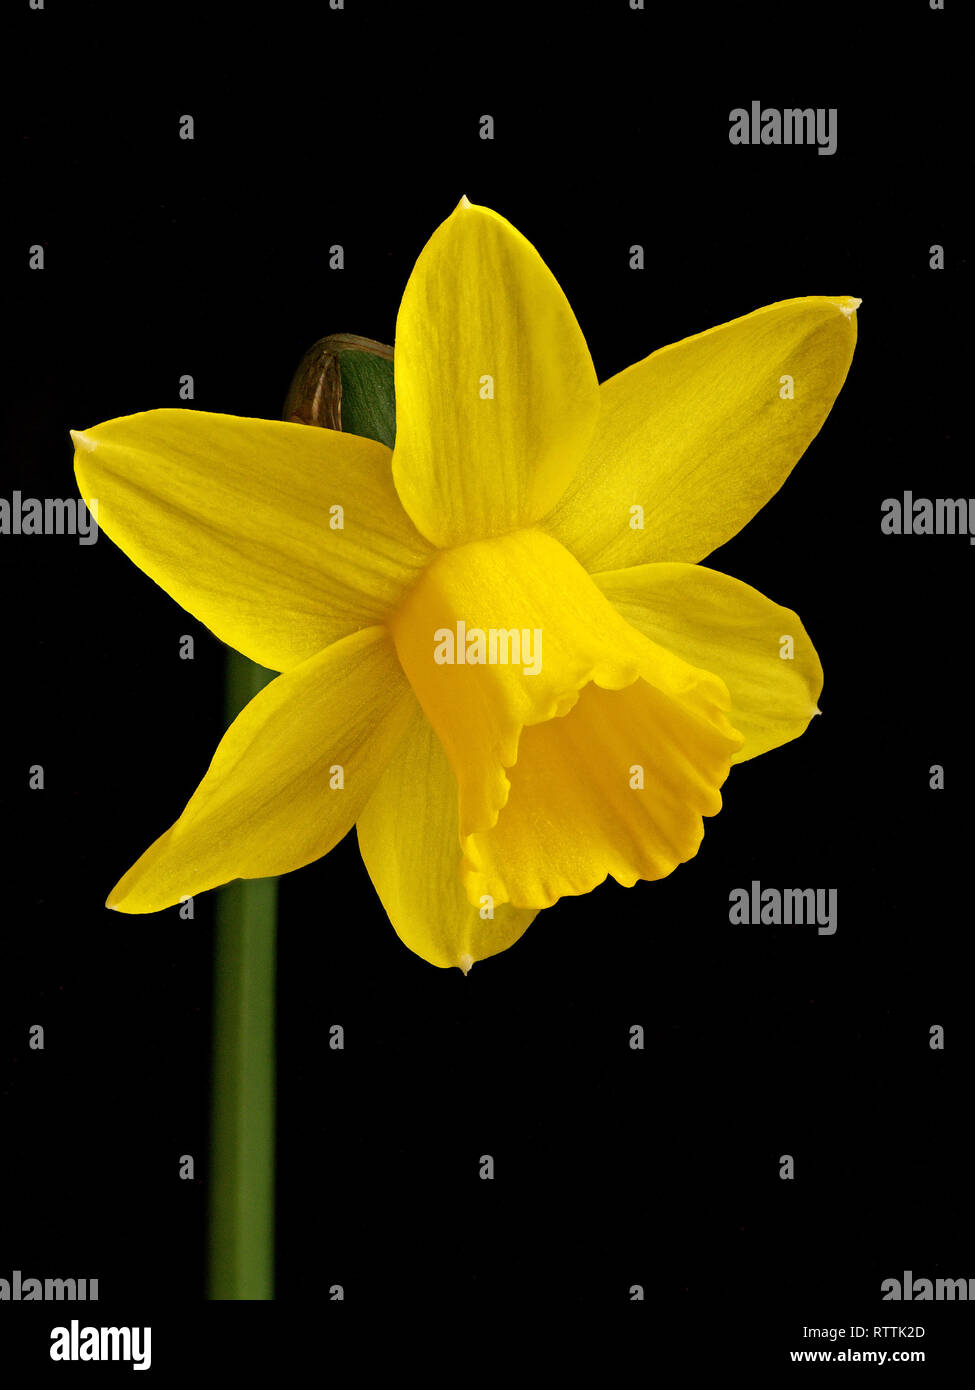 Focus stacked closeup of a single miniature bright yellow daffodil flower (Narcissus Tete a Tete) isolated against black background. Stock Photo